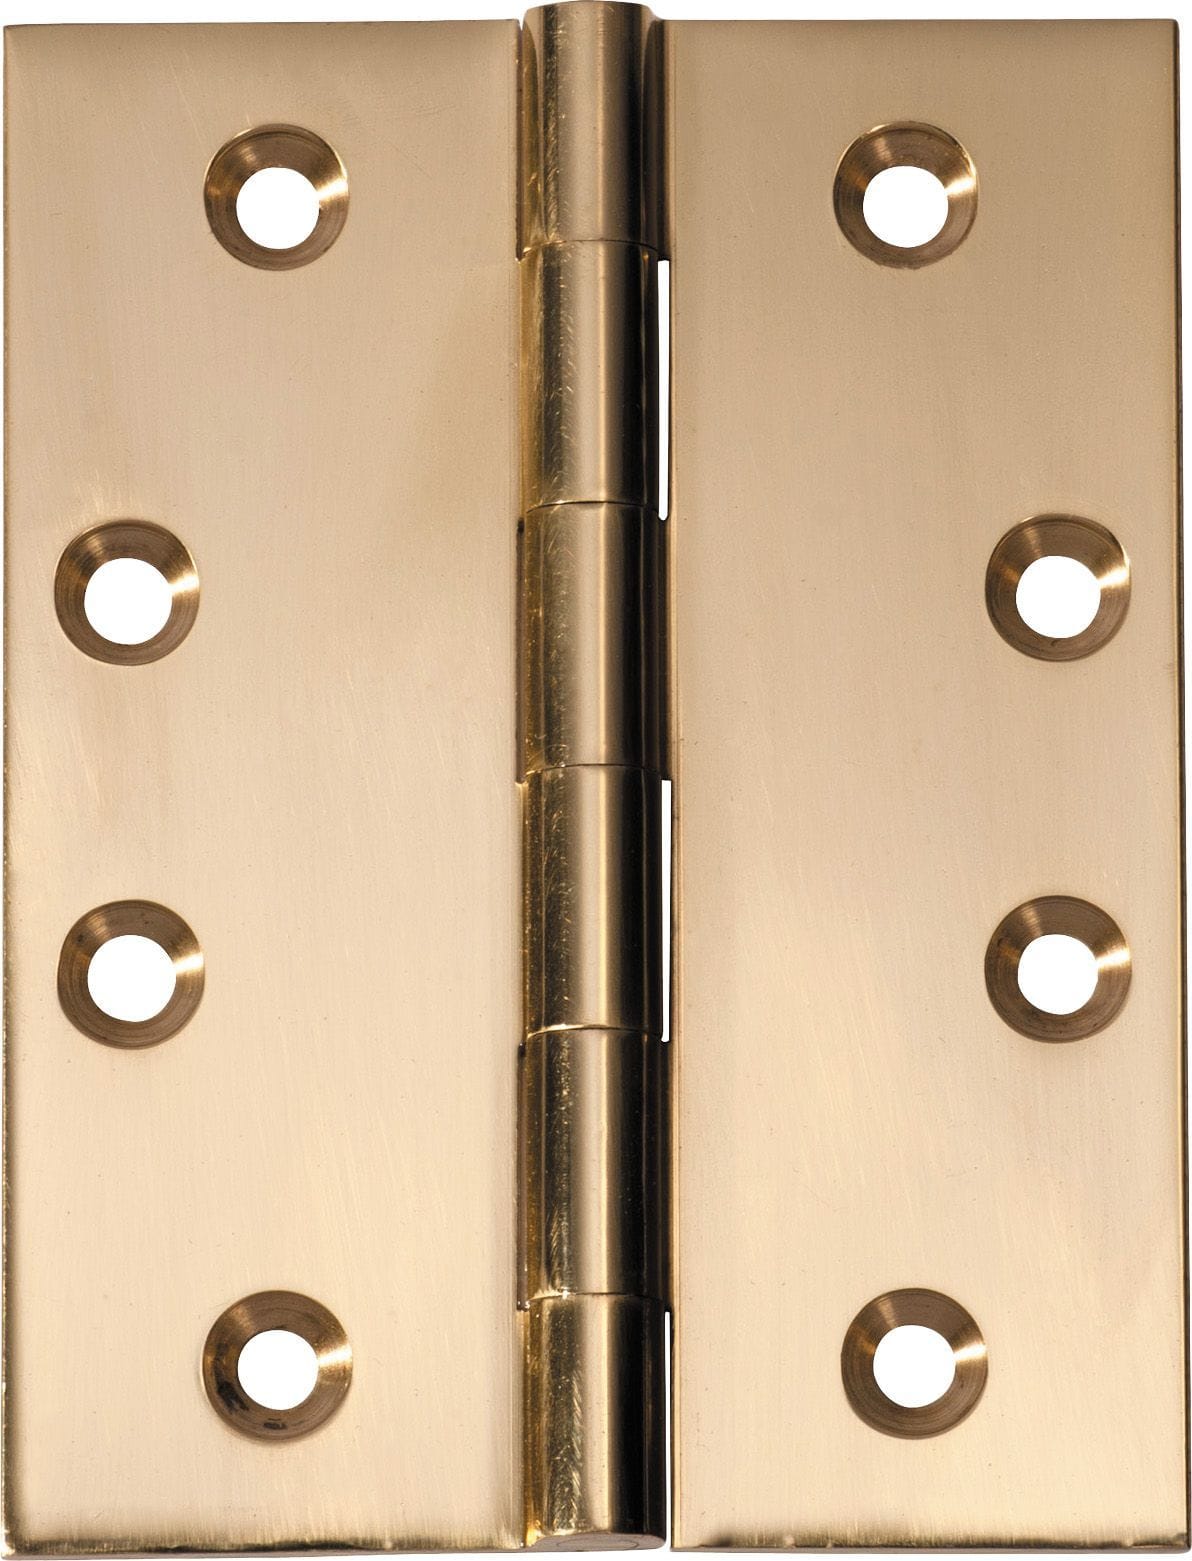 Hinge - Fixed Pin Unlacquered Polished Brass 100mm x 75mm